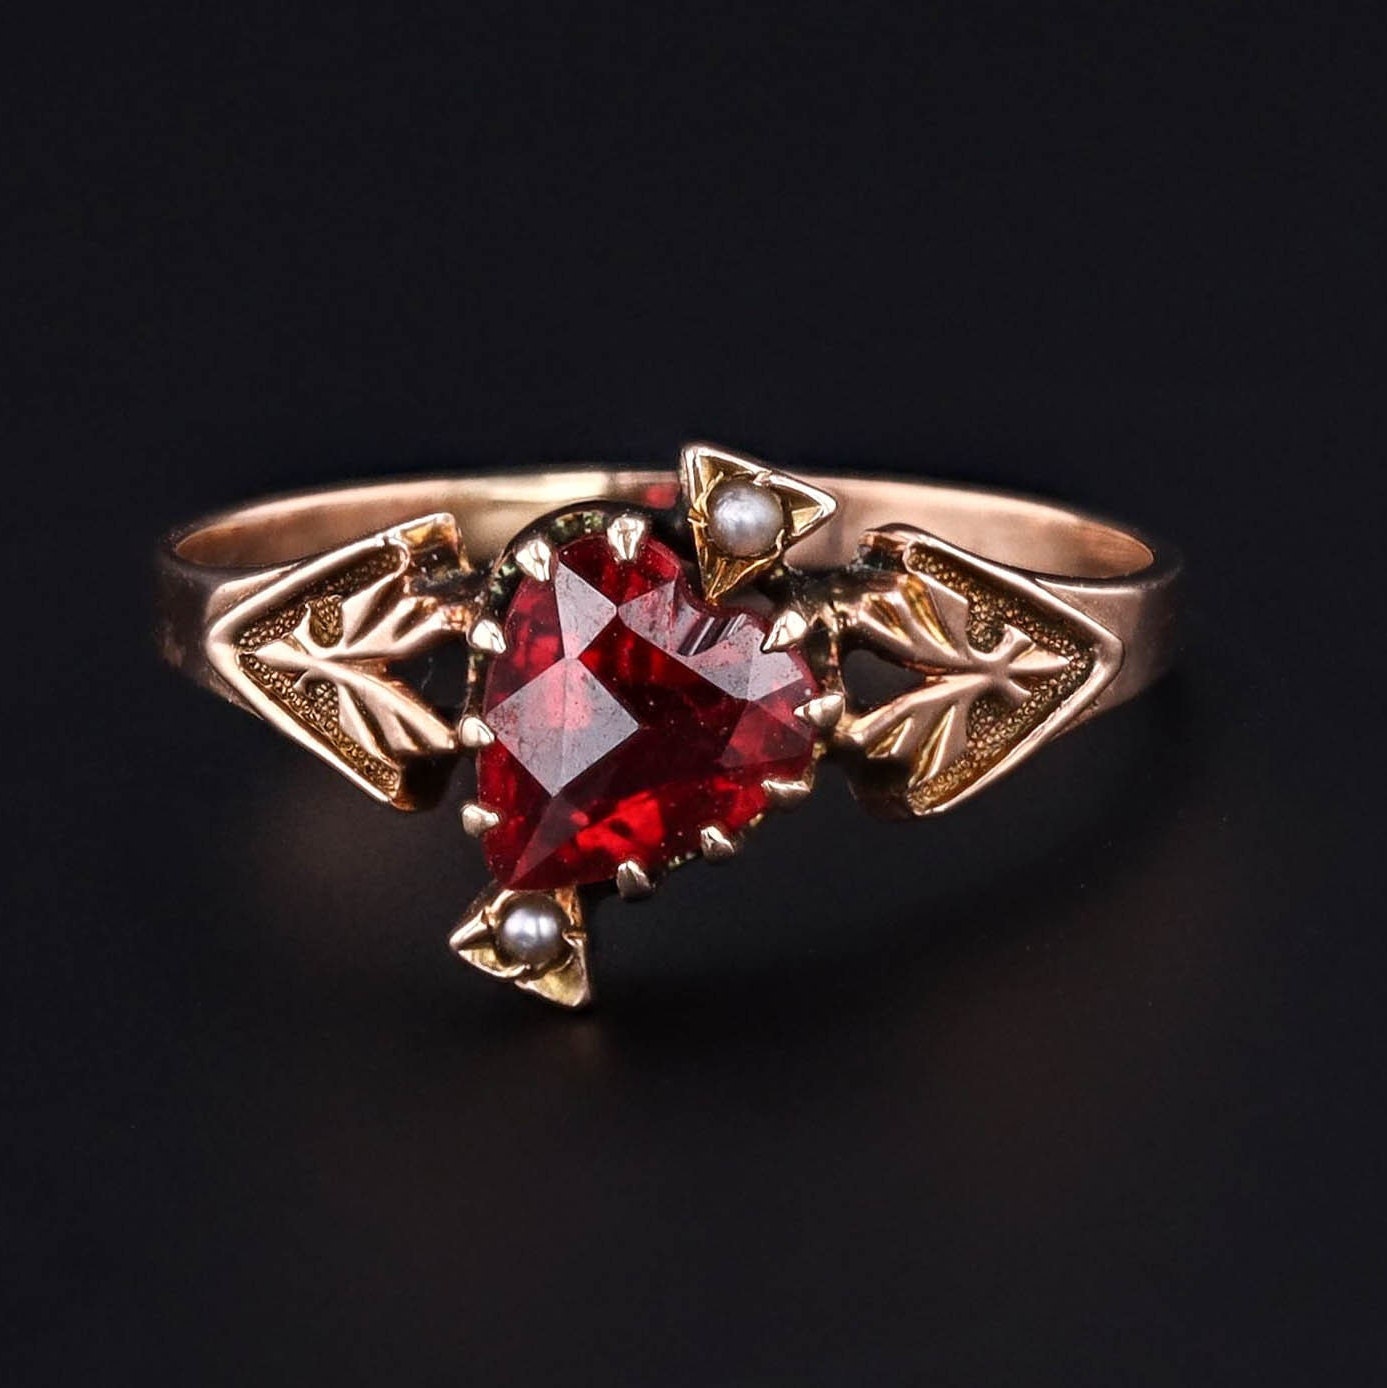 Antique Heart Ring | Paste Heart With Pearls Ring 